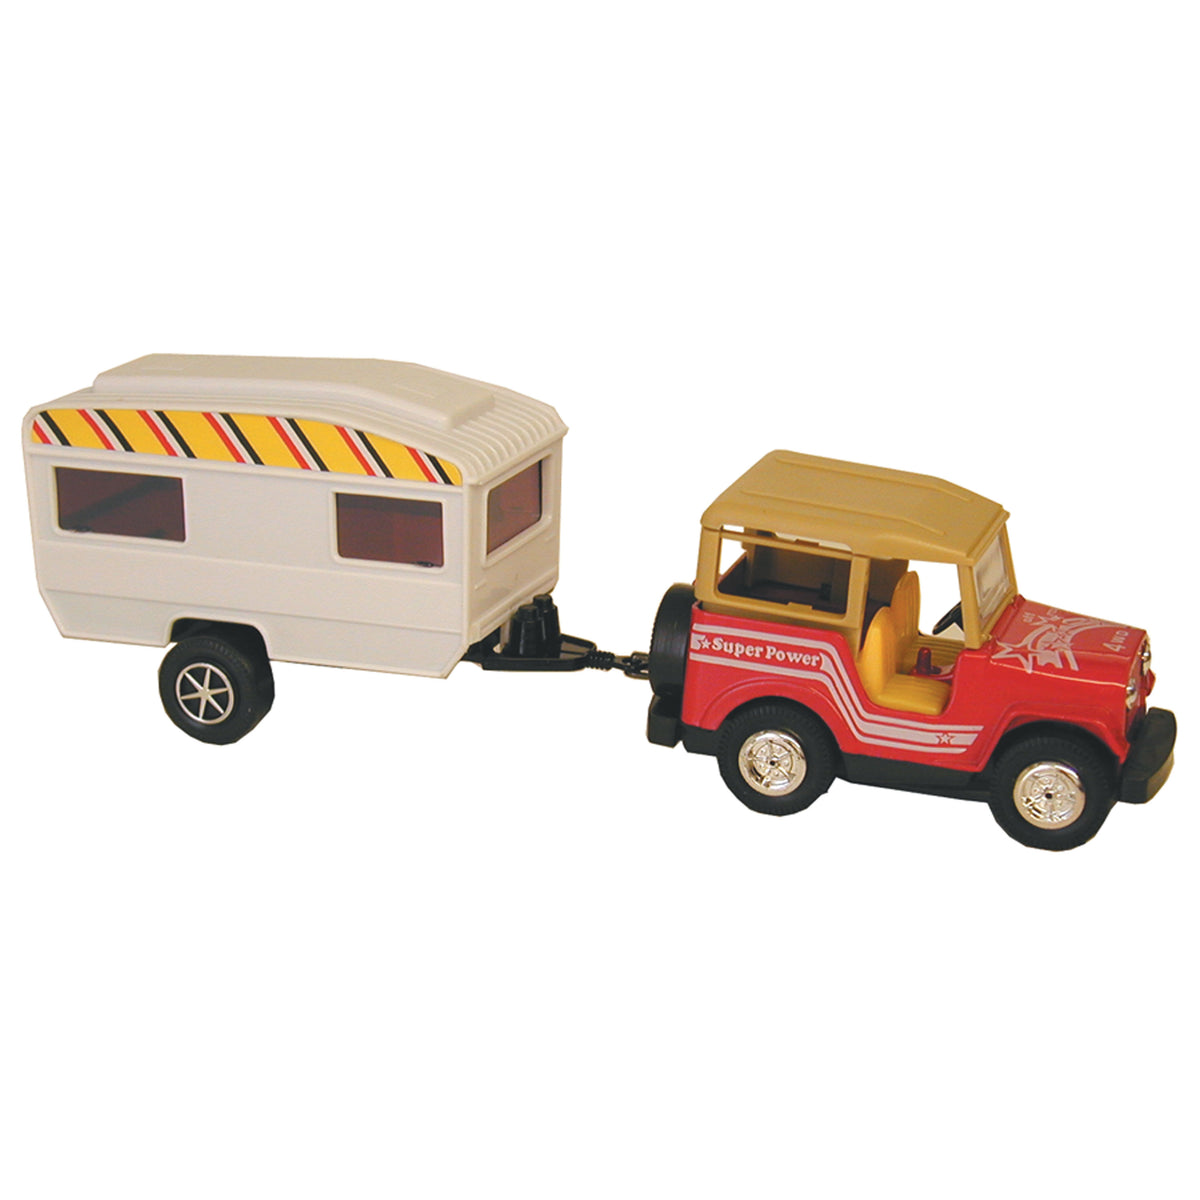 Prime Products 27-0010 RV Toys - SUV and Trailer